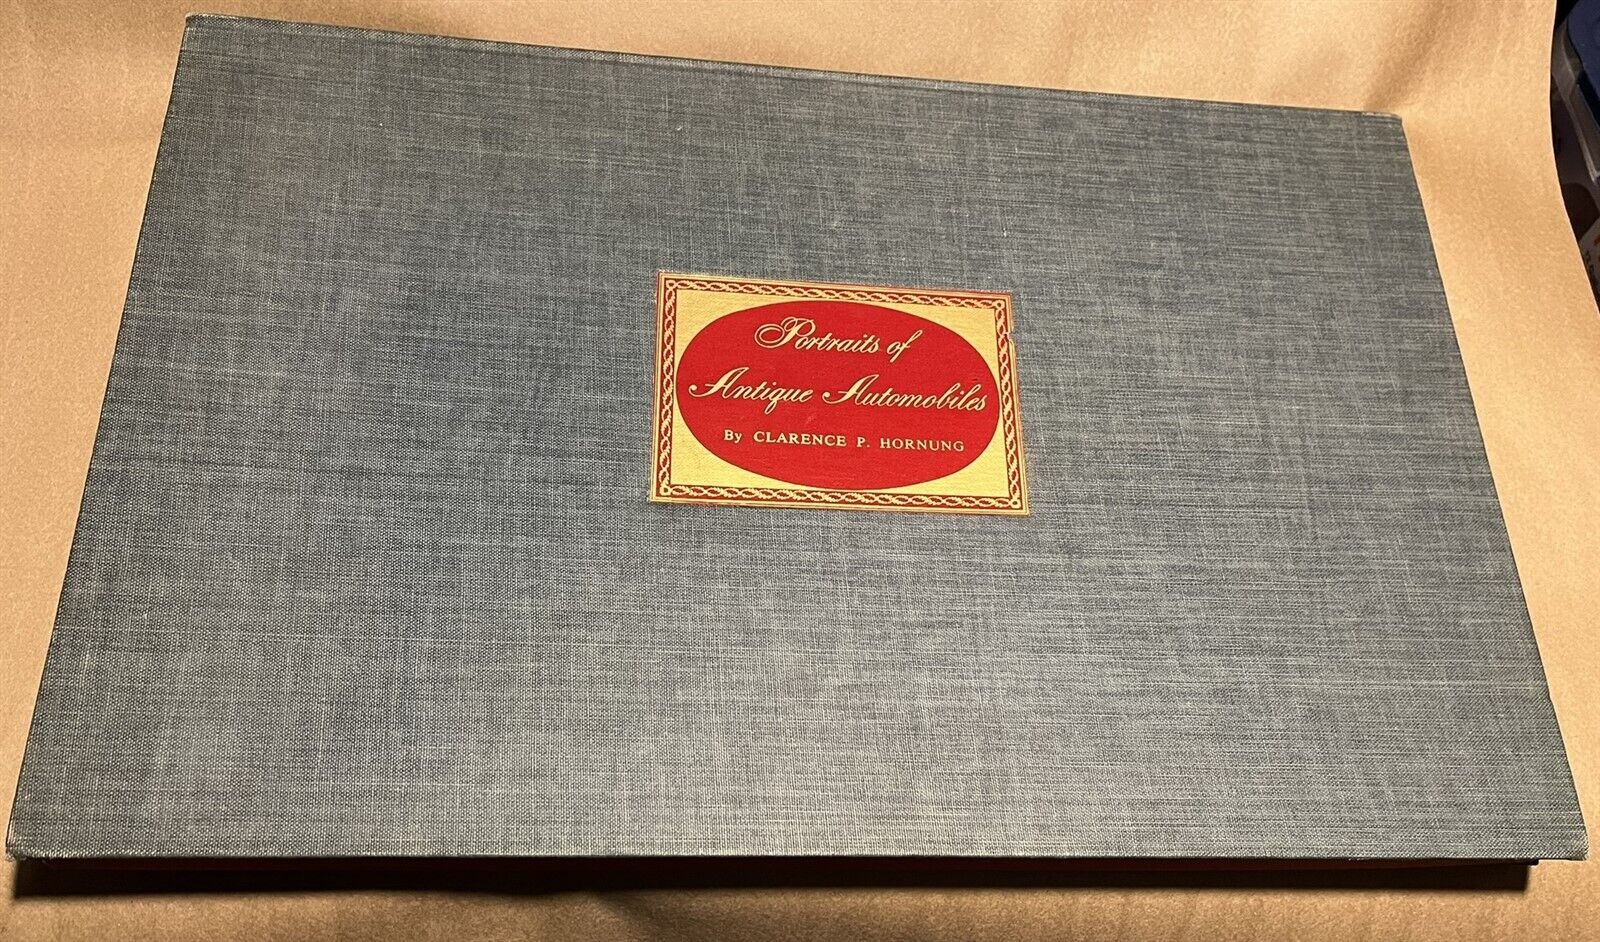 Book Portraits of Antique Automobiles by Clarence P. Hornung Collectors' Prints